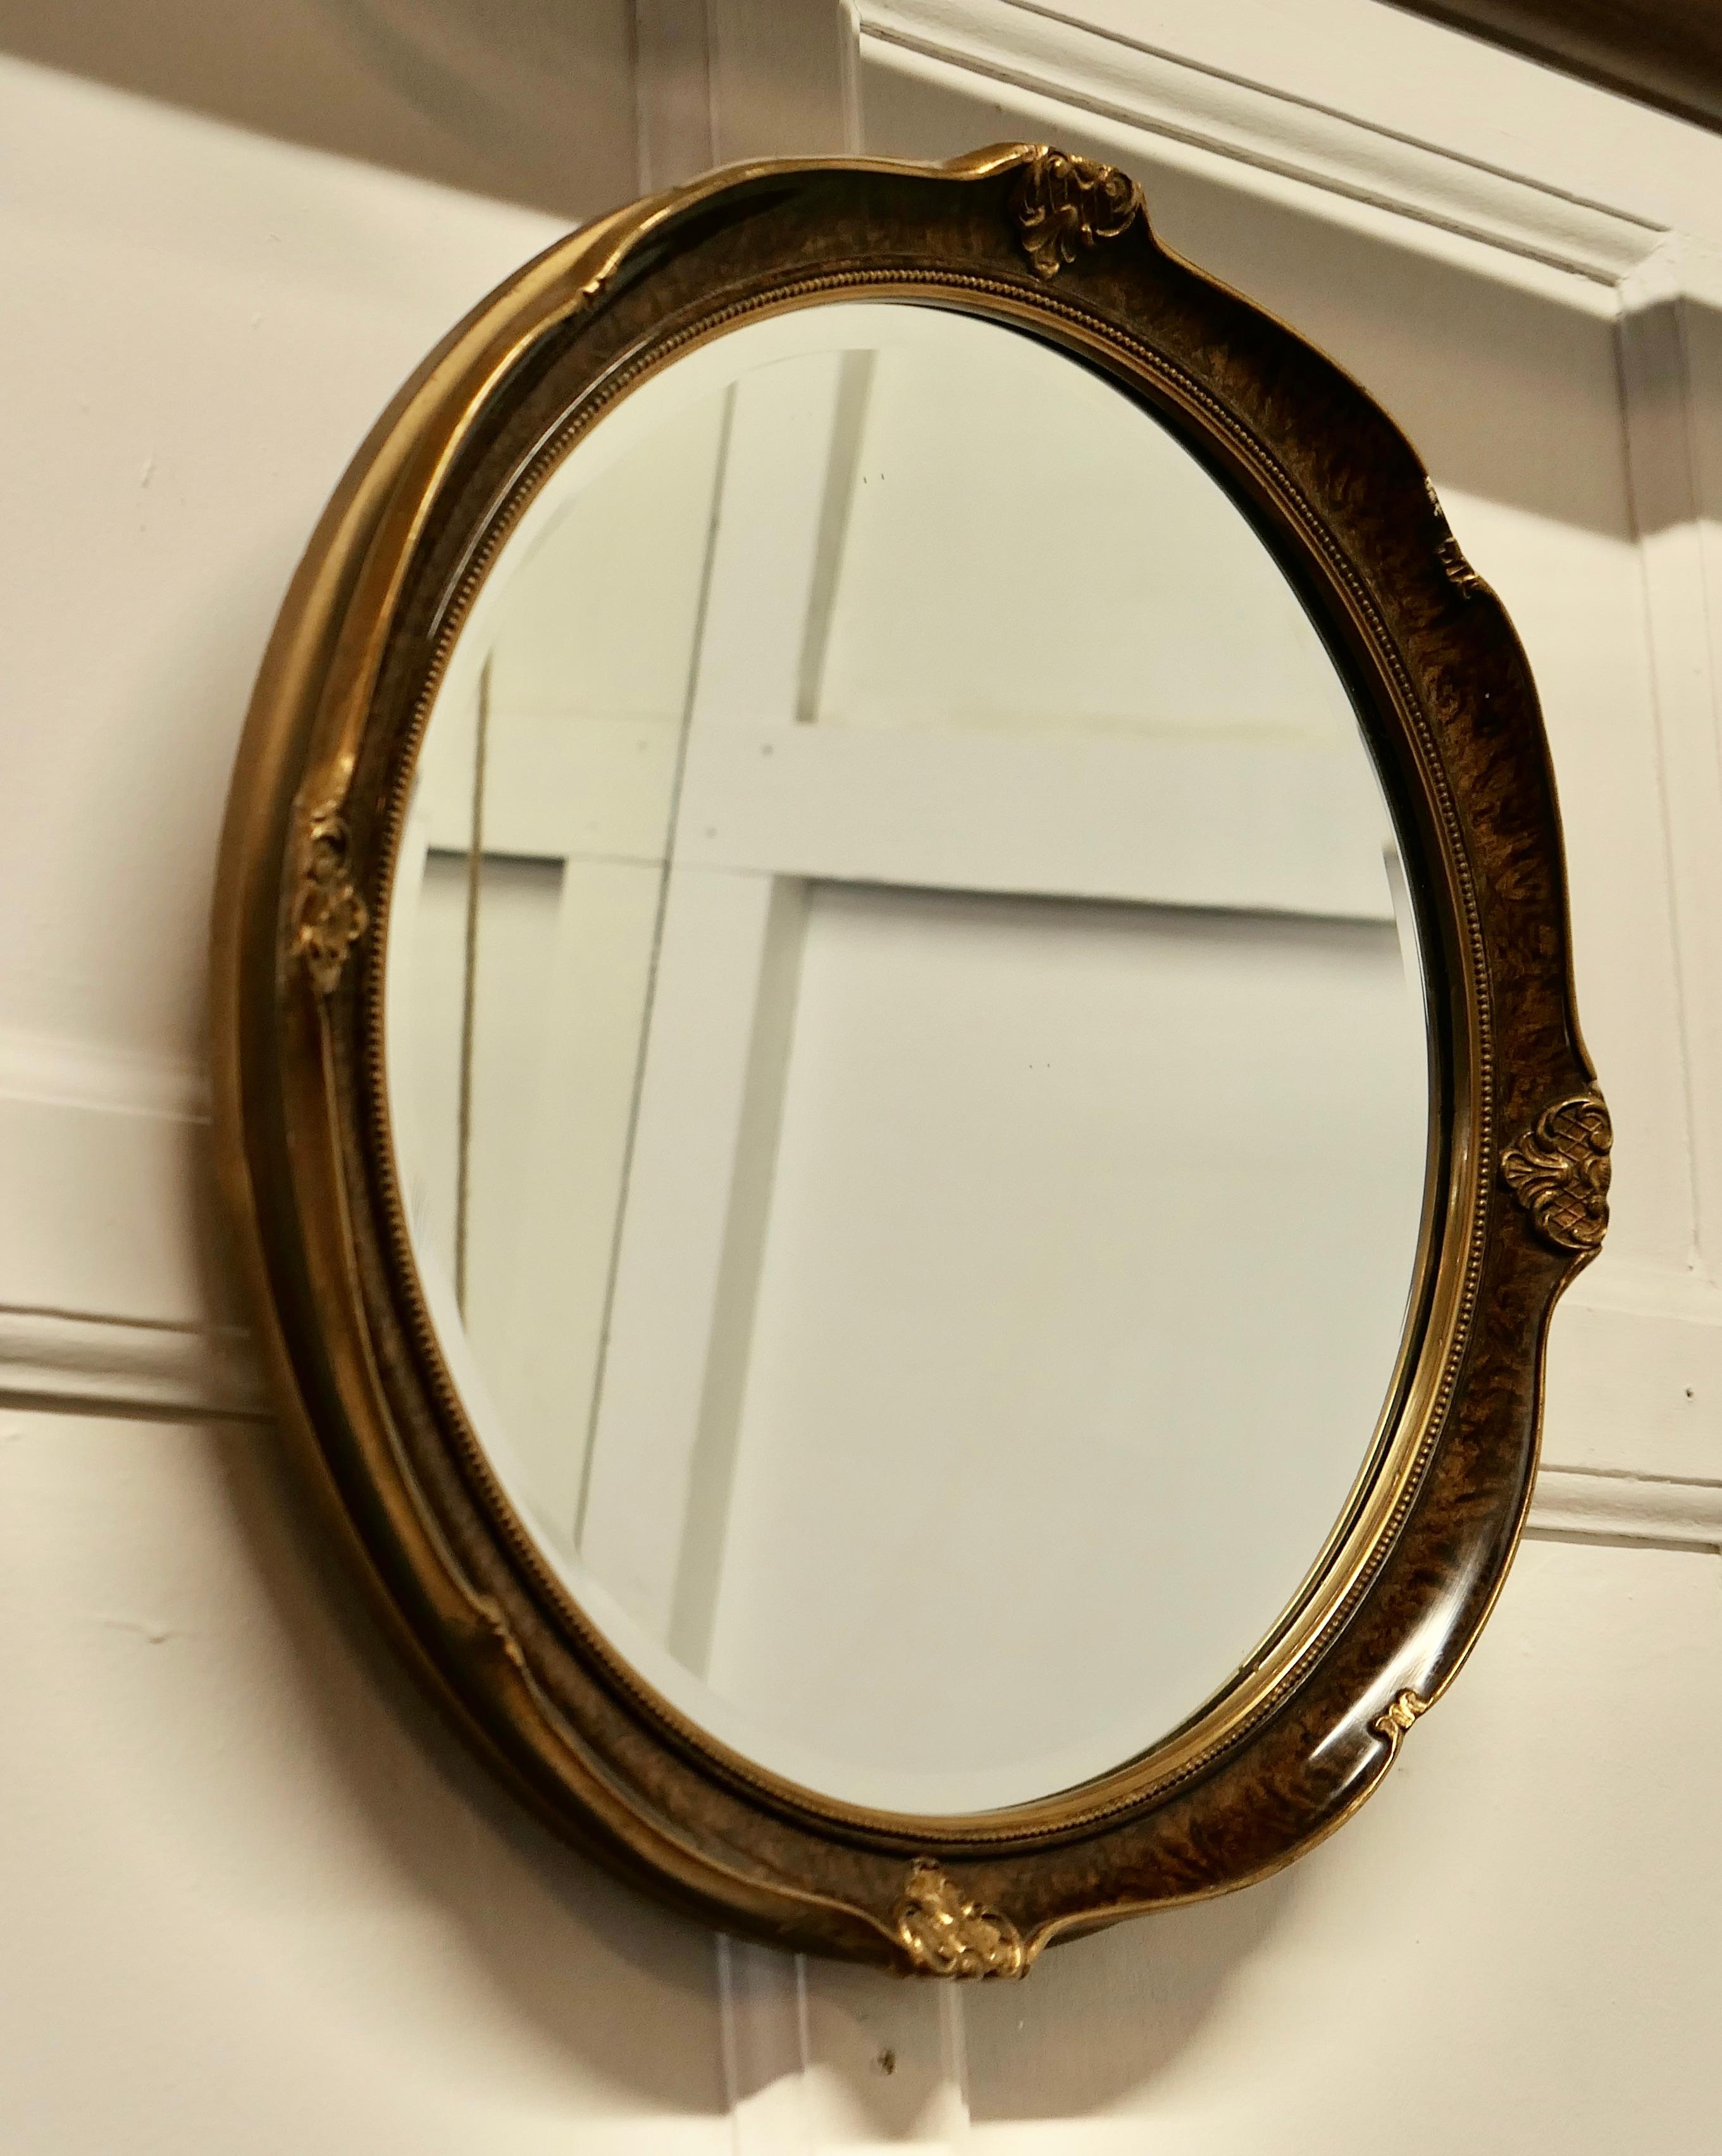 Scumble Finish Oval Mirror

This Mirror has a 2” wide moulded round frame, this has a Scumble finish simulating tortoise shell with a gilt decorated edge 
The frame is in good attractive condition as is the original bevelled looking glass
The